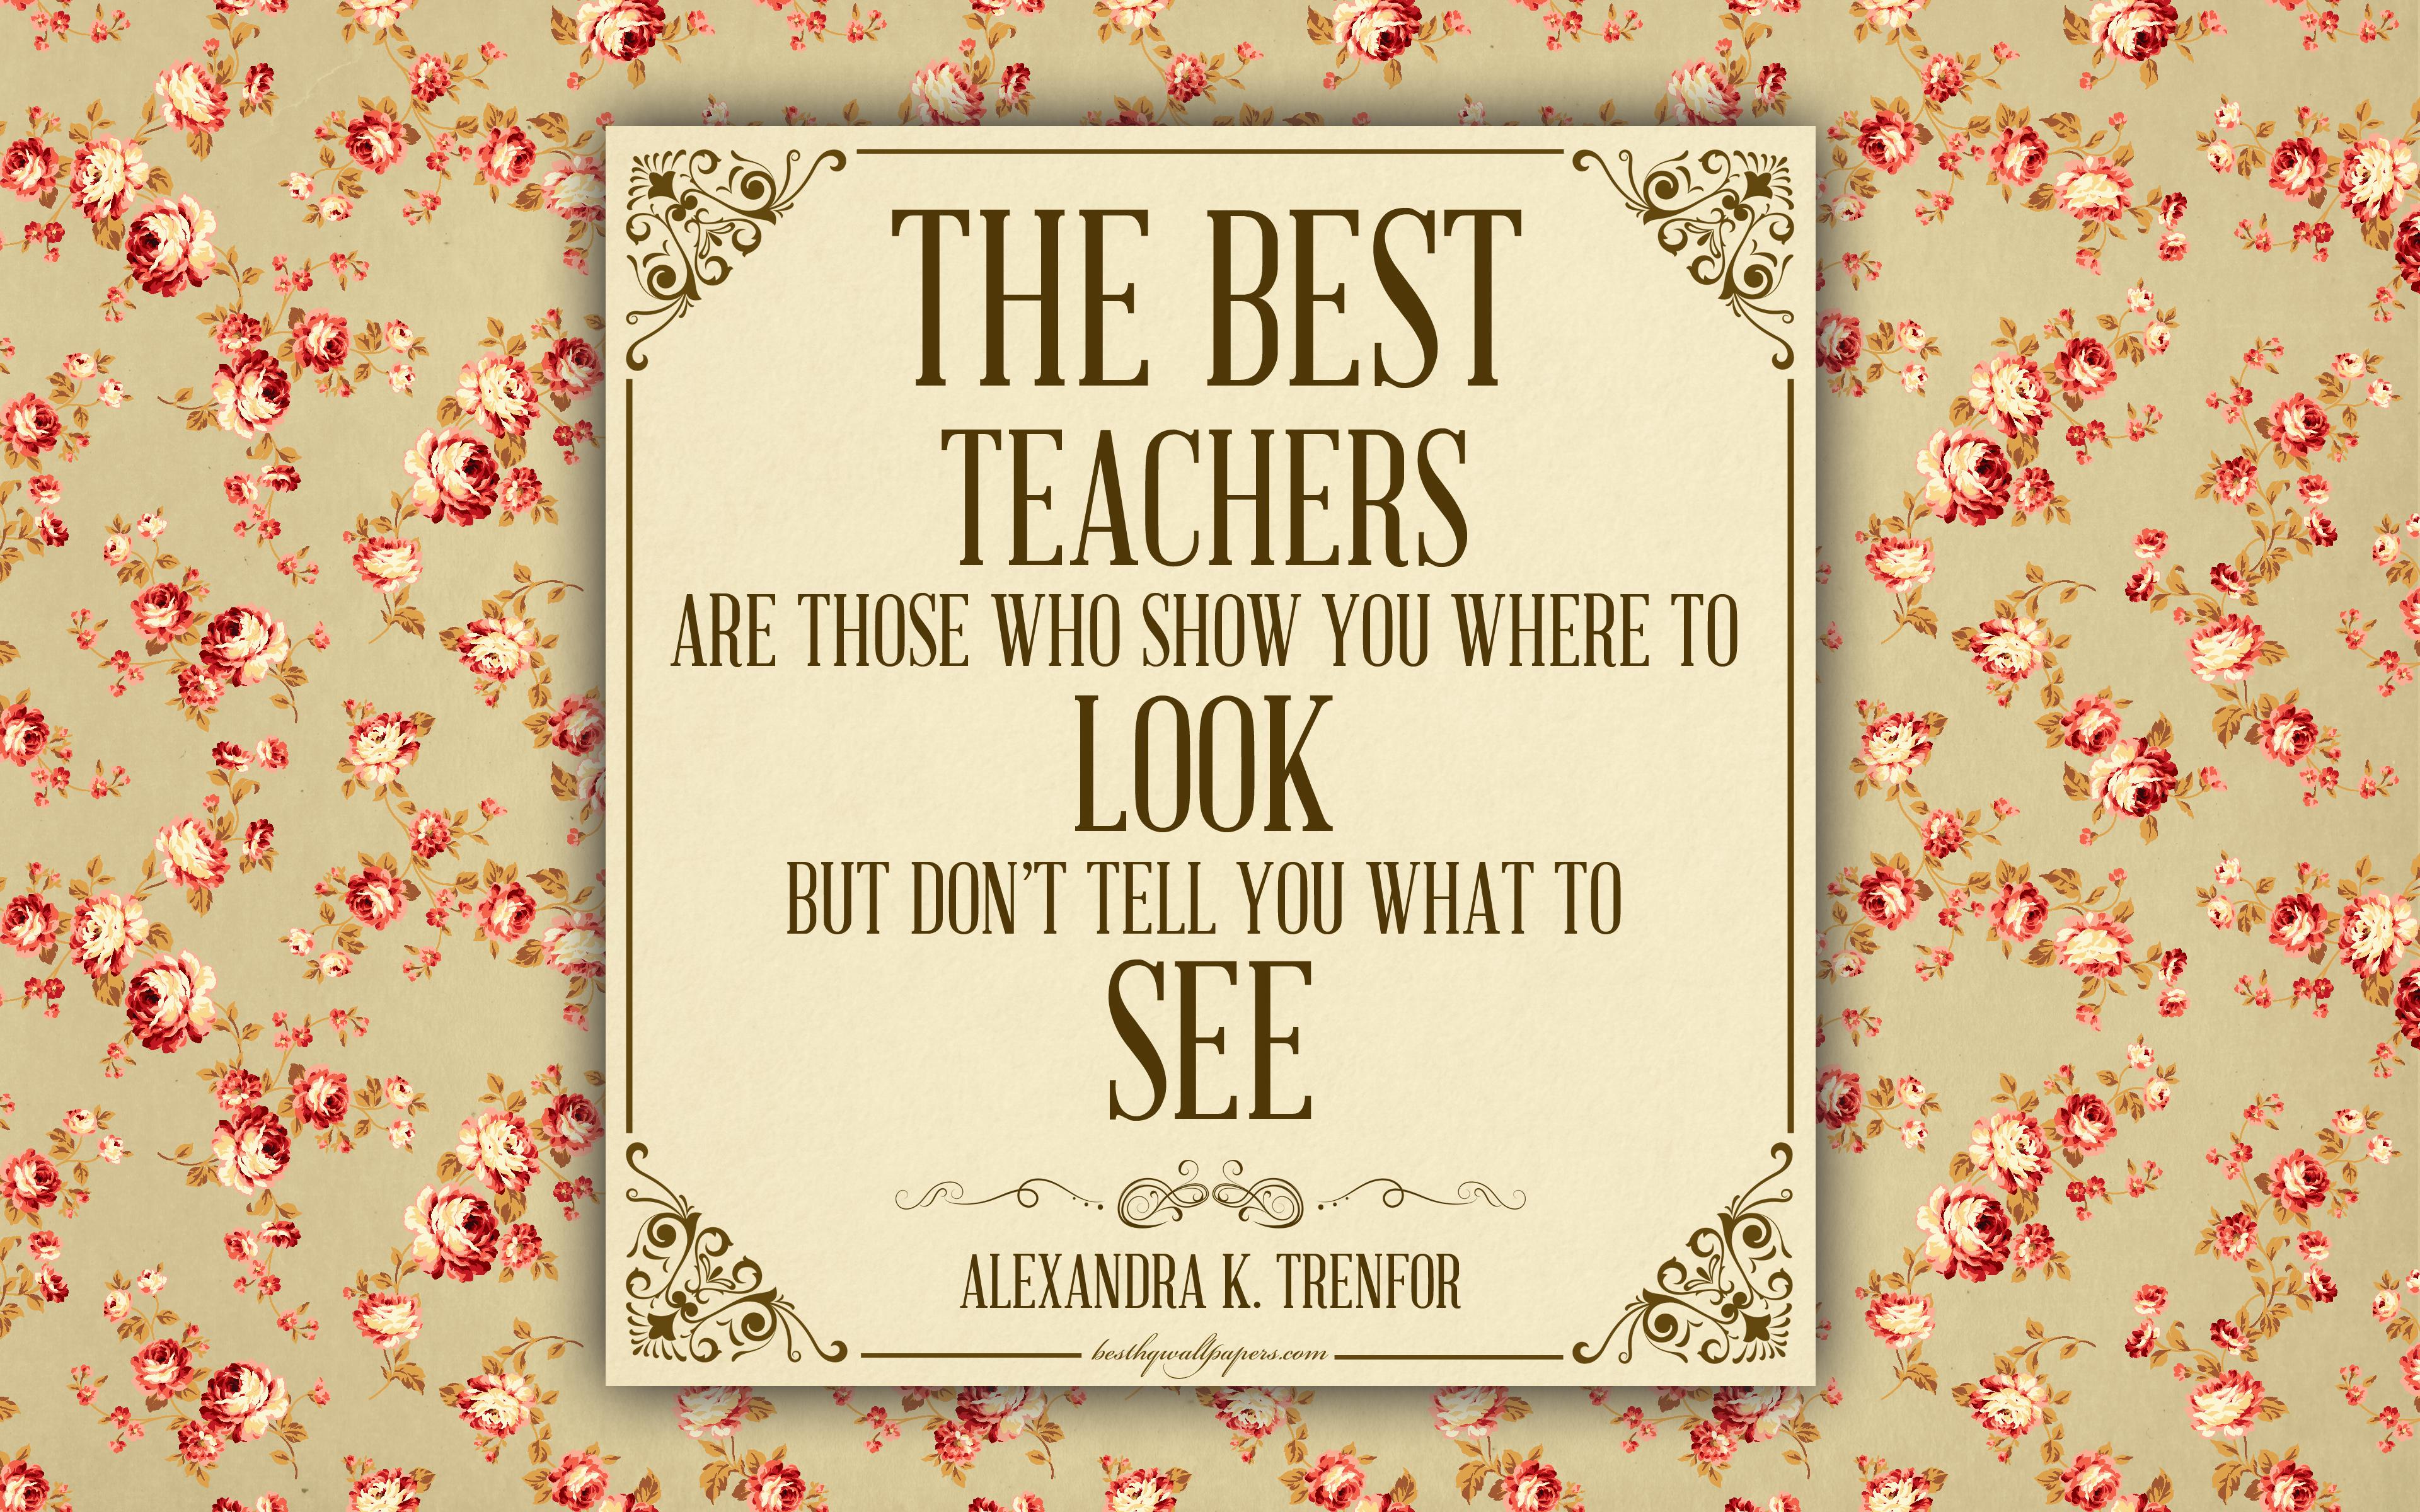 Download wallpaper The best teachers are those who show you where